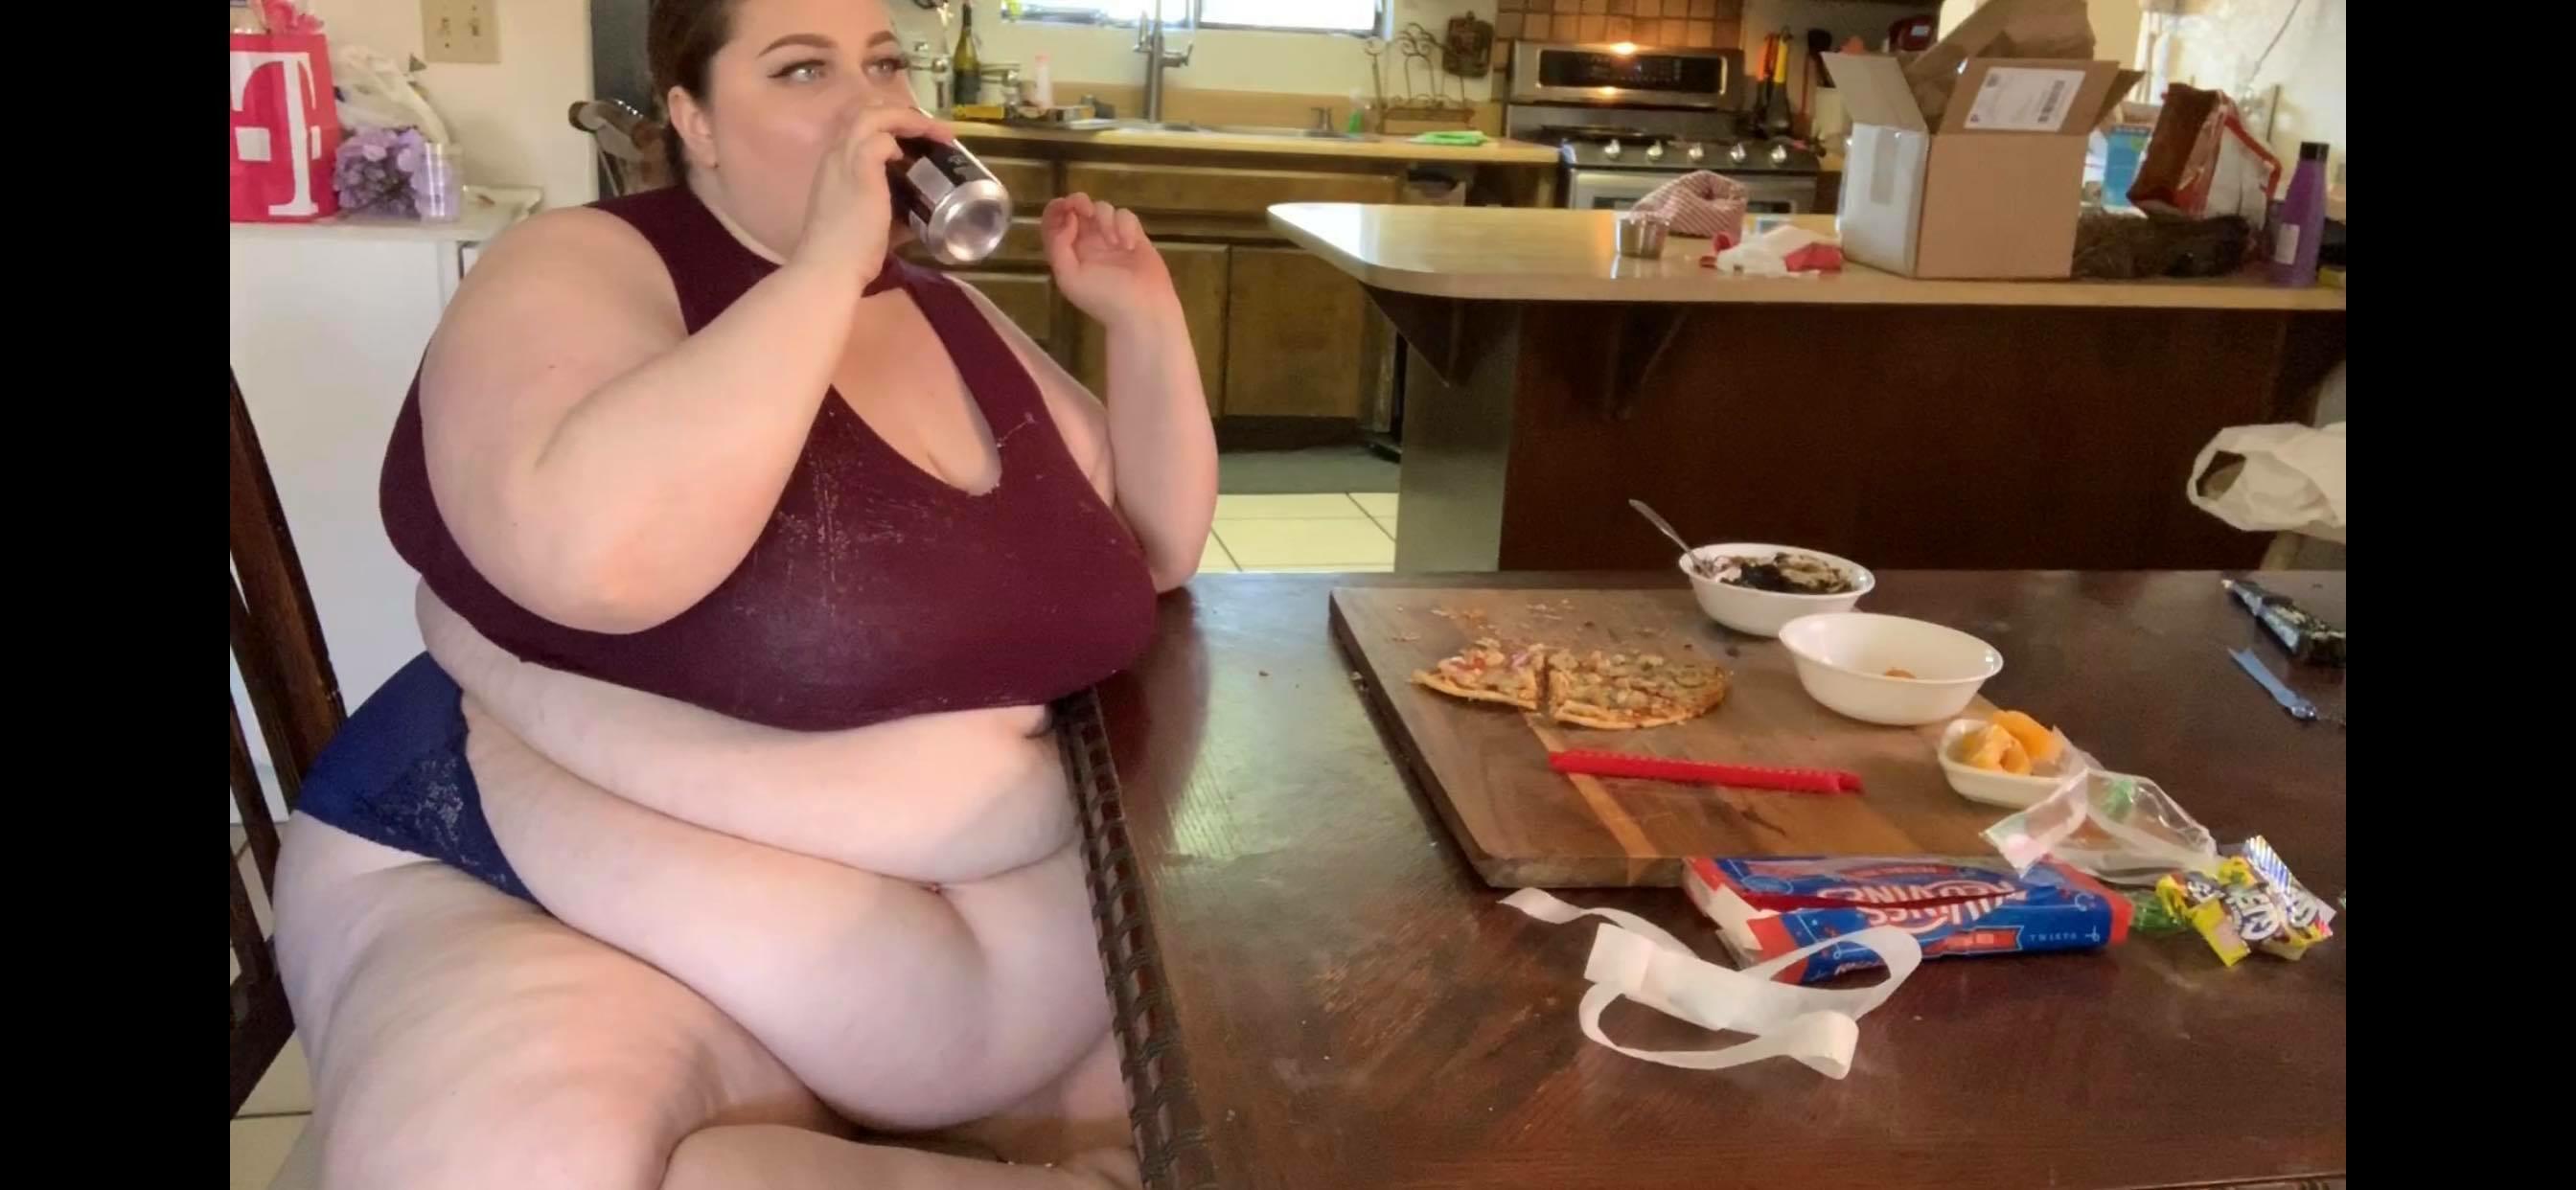 Pizza, snacks, cola and YUM! - Video Clips - Curvy BBW - Curvage